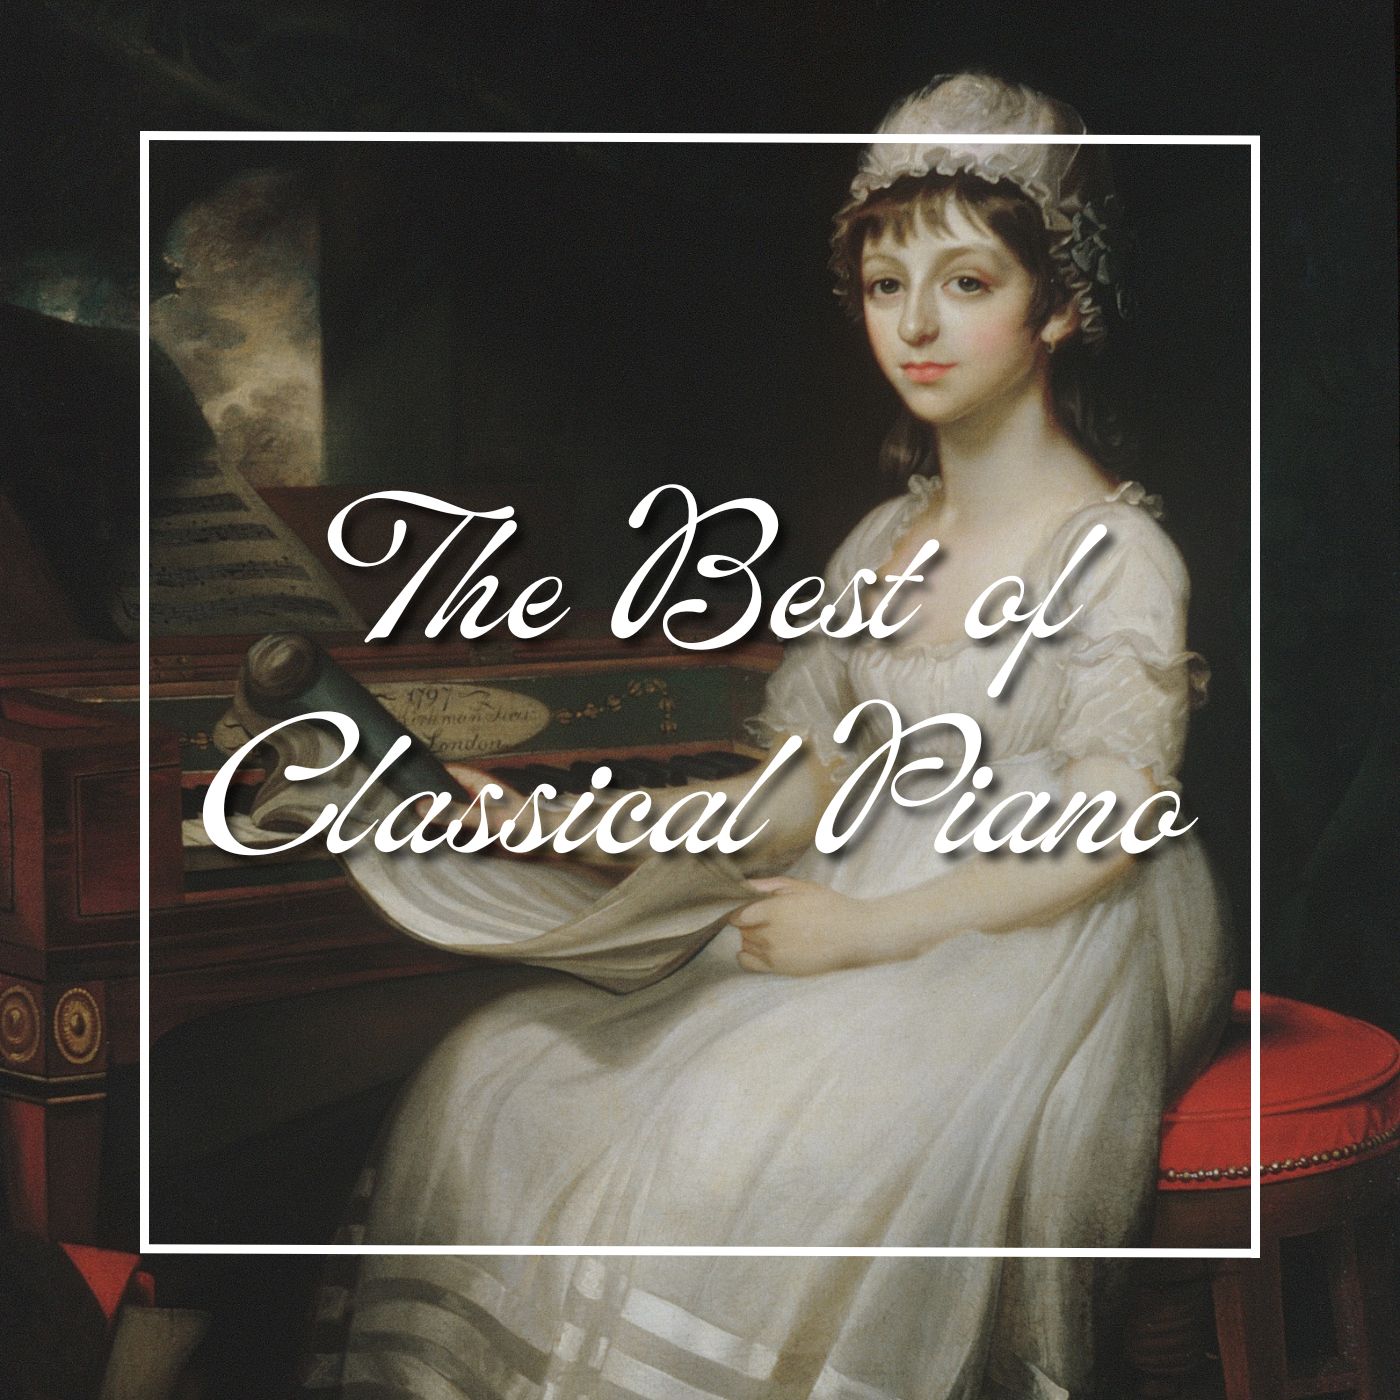 The Best of Classical Piano